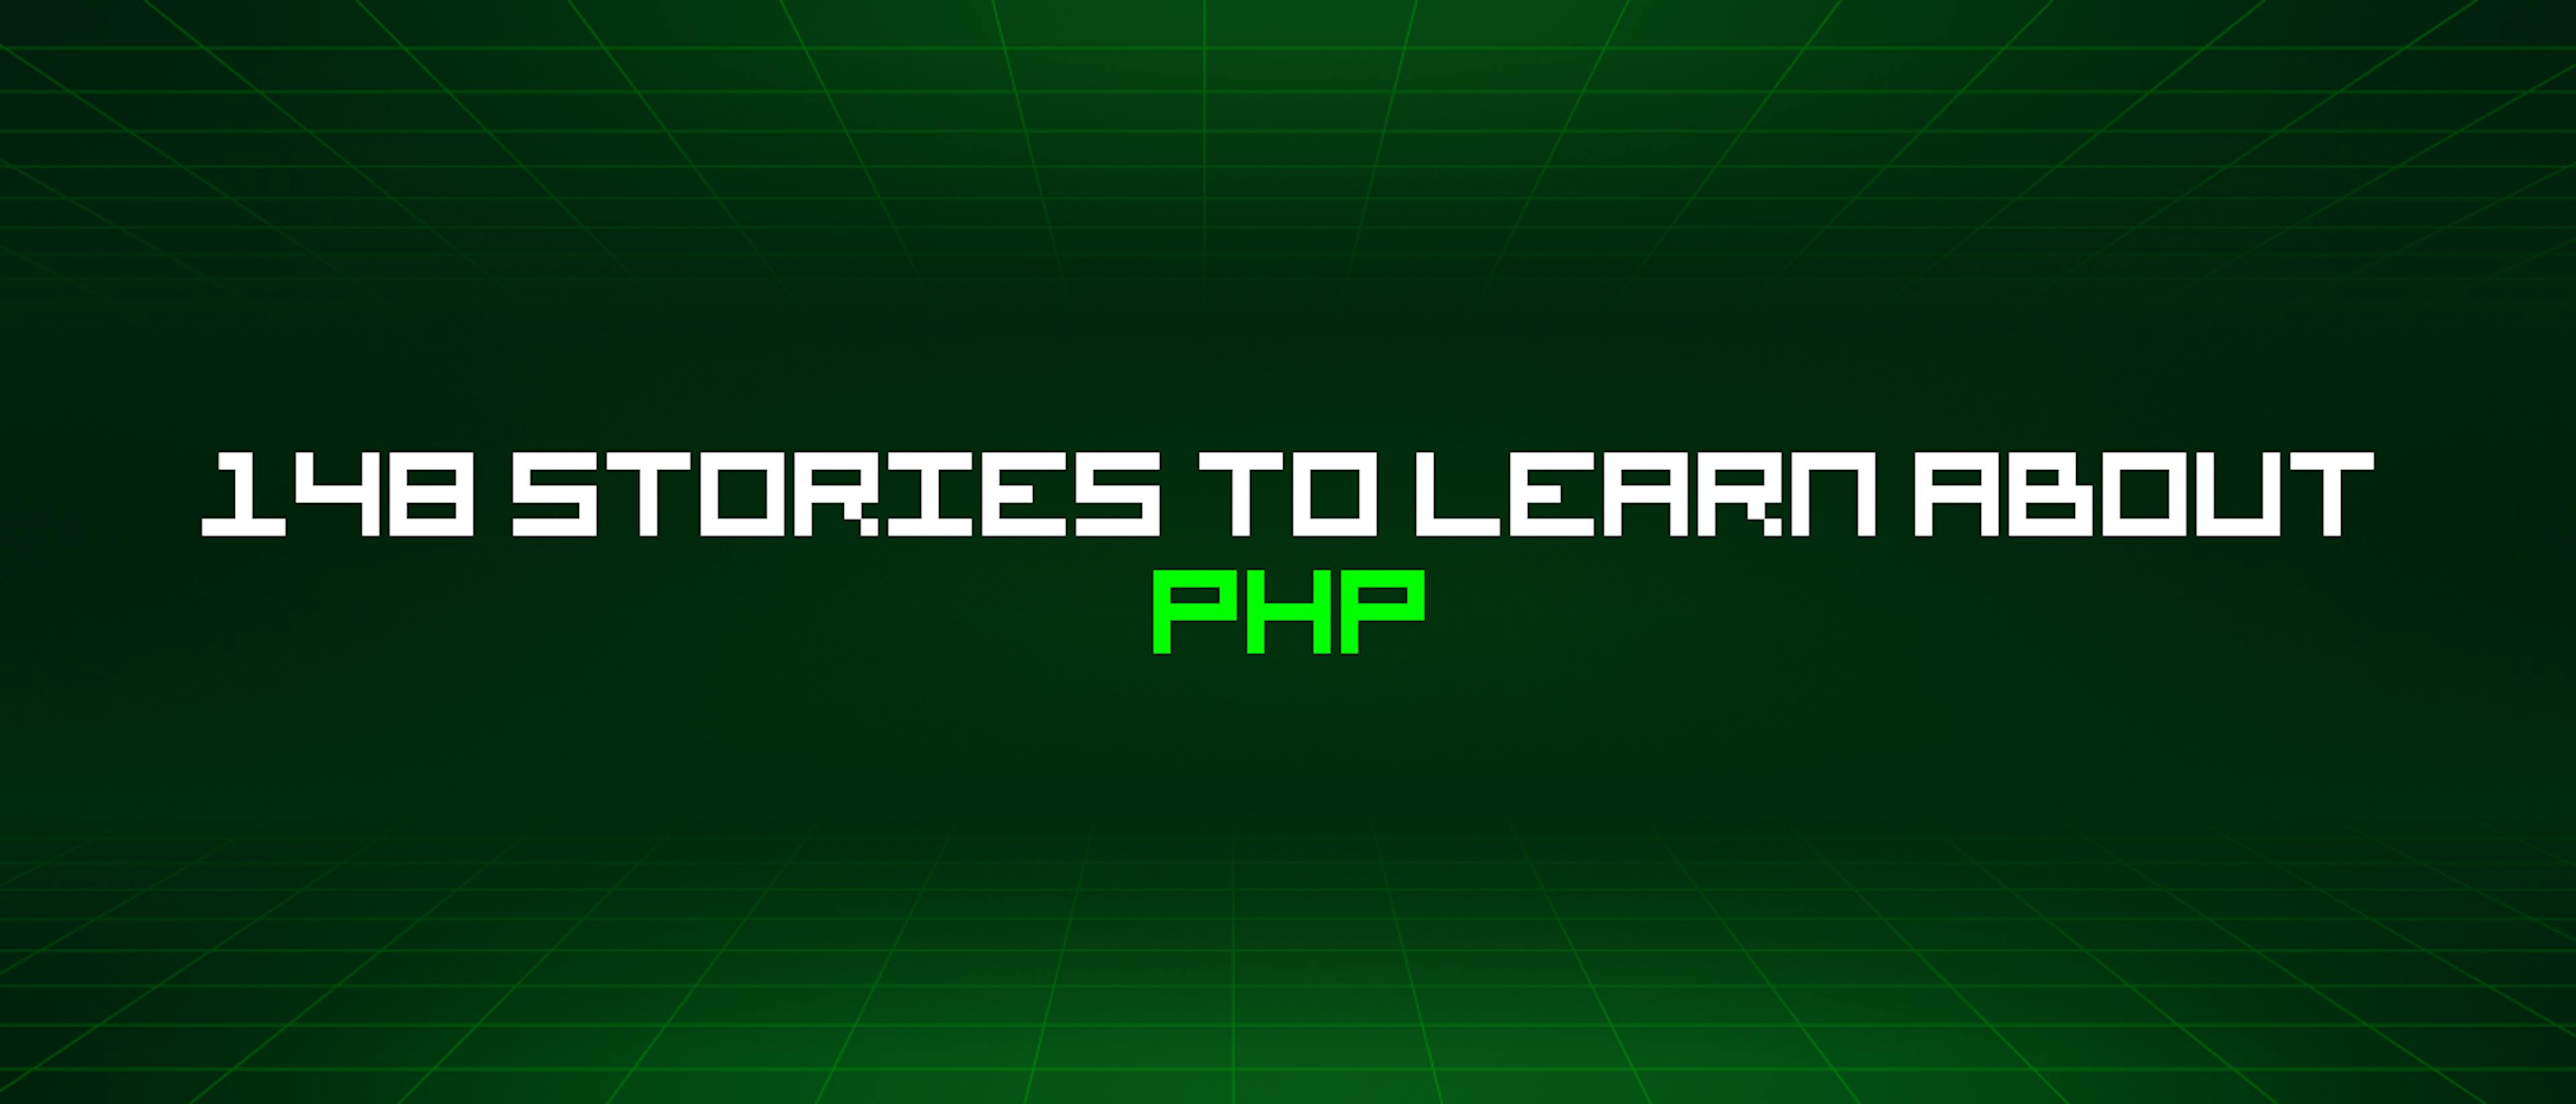 featured image - 148 Stories To Learn About Php